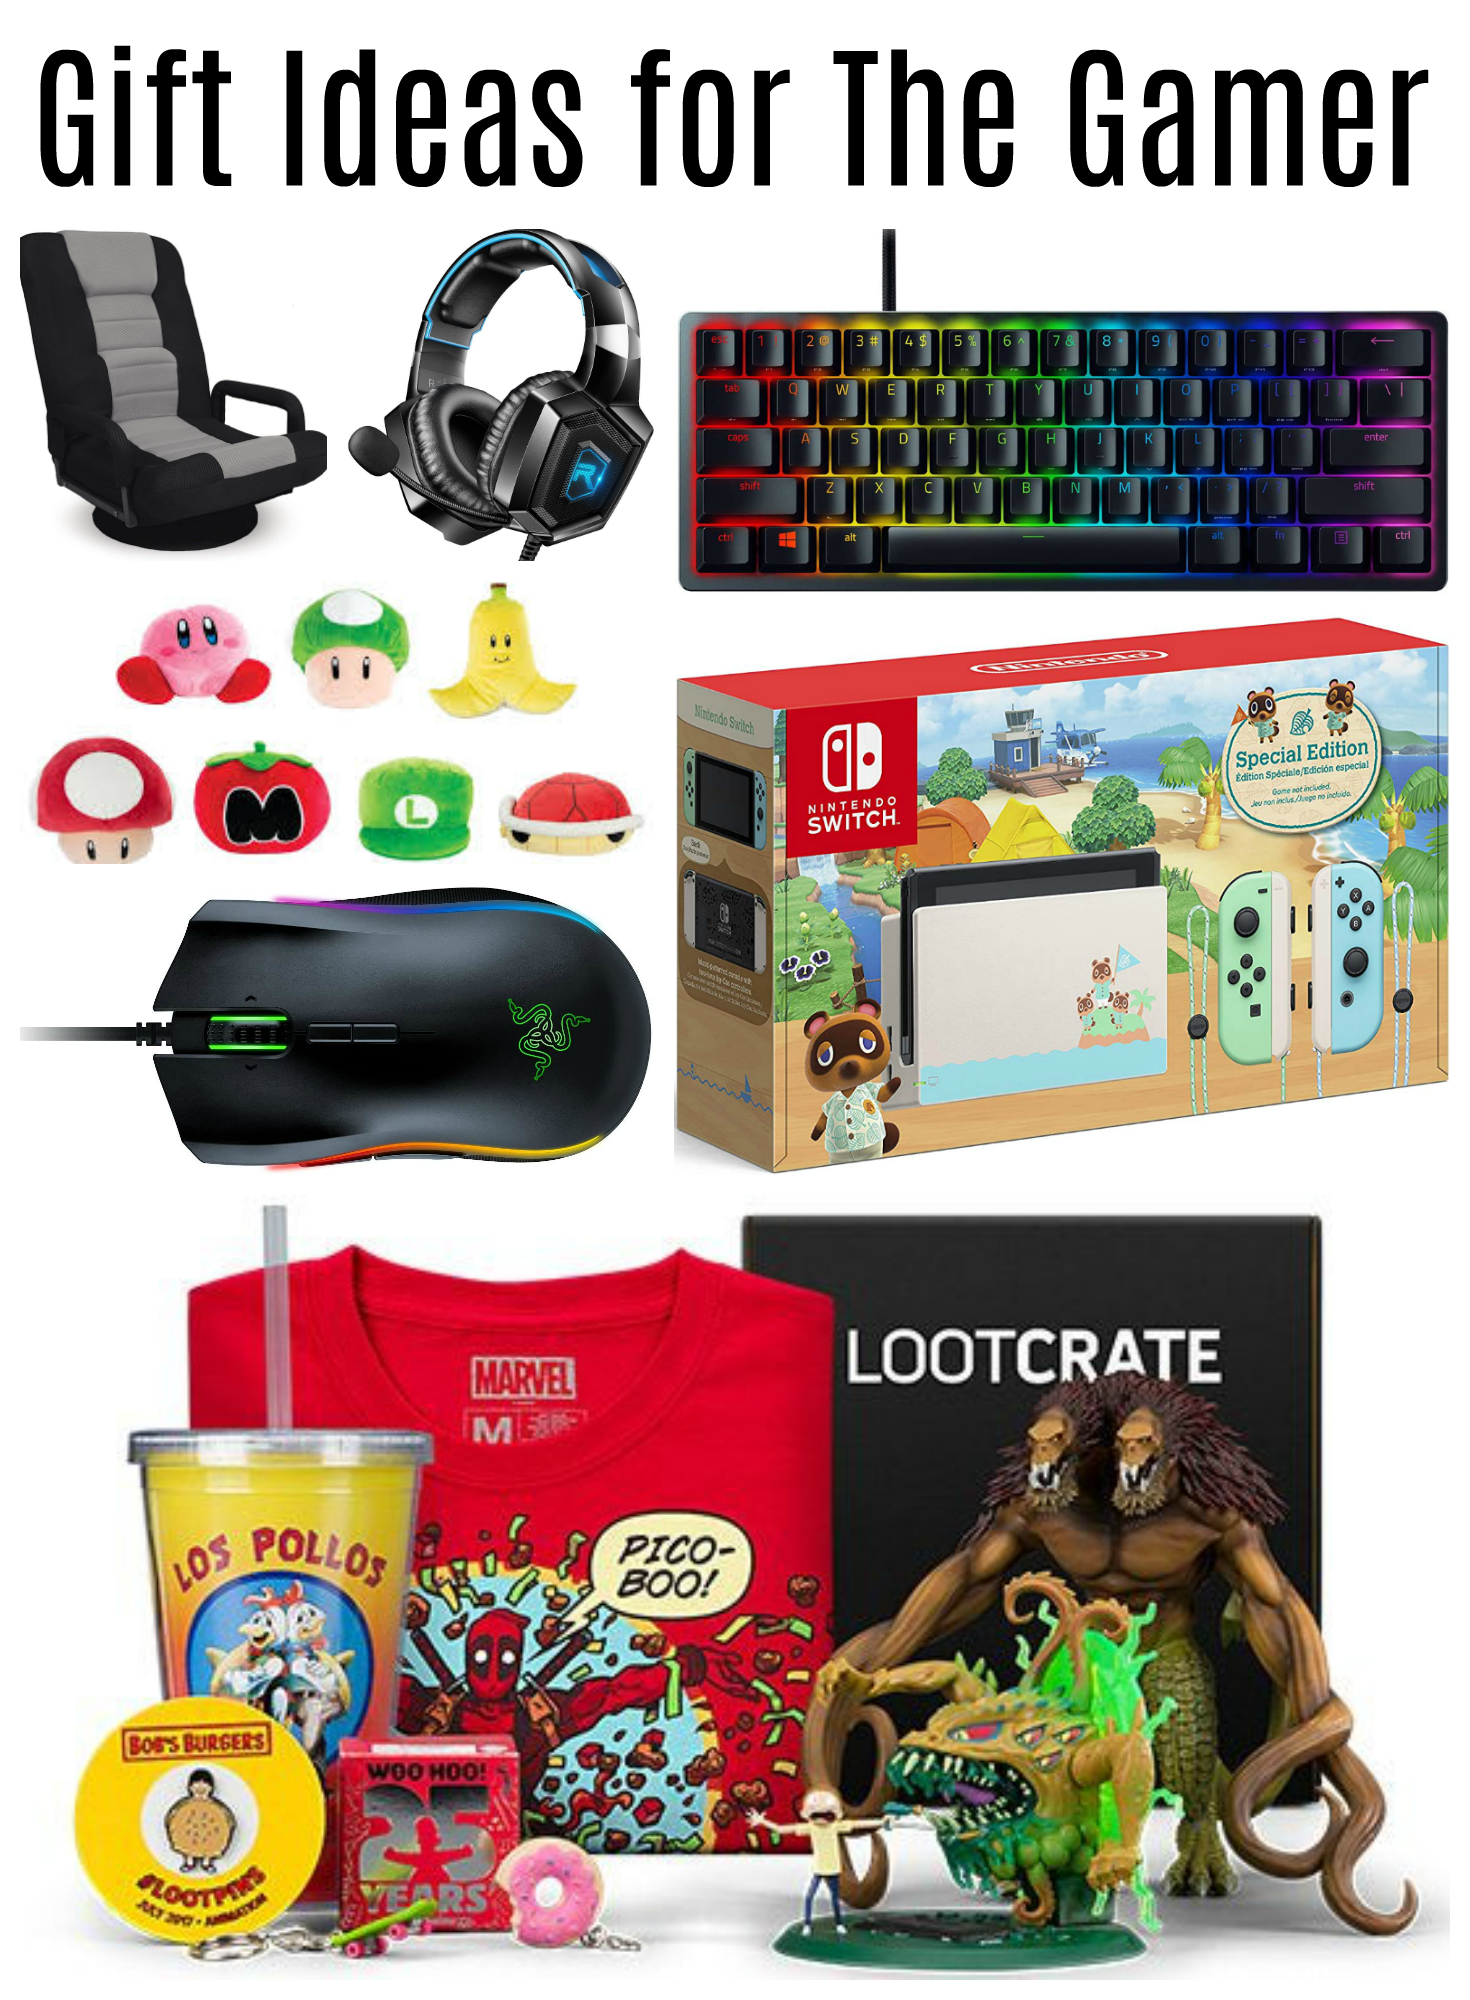 What to buy a gamer who has too many games? Non-game gift ideas